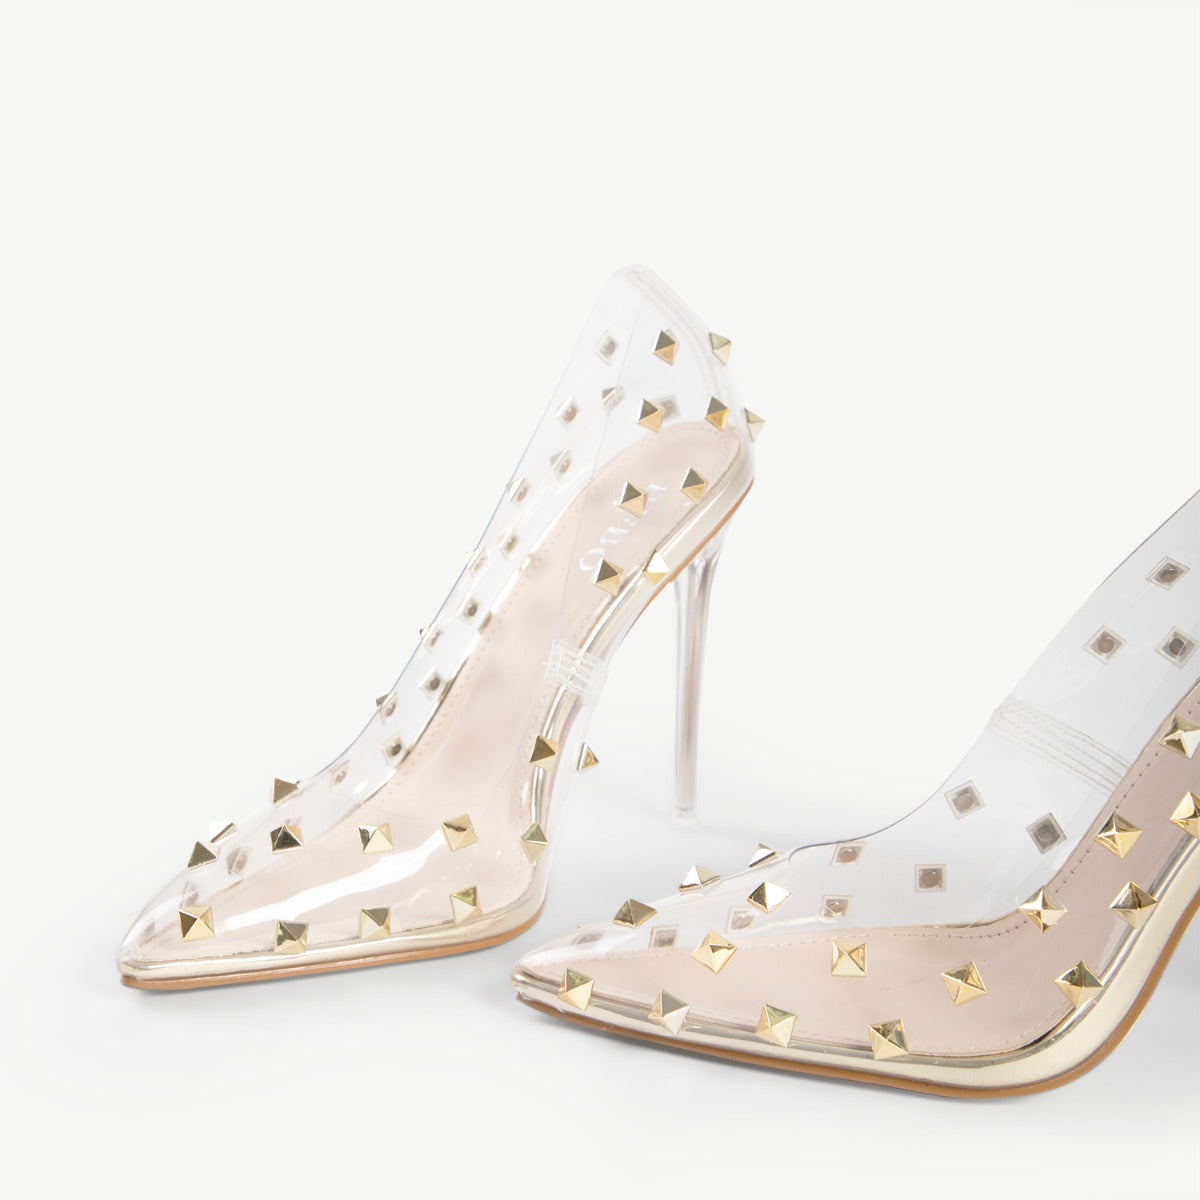 BEBO Mayra Perspex Court Shoe in Gold